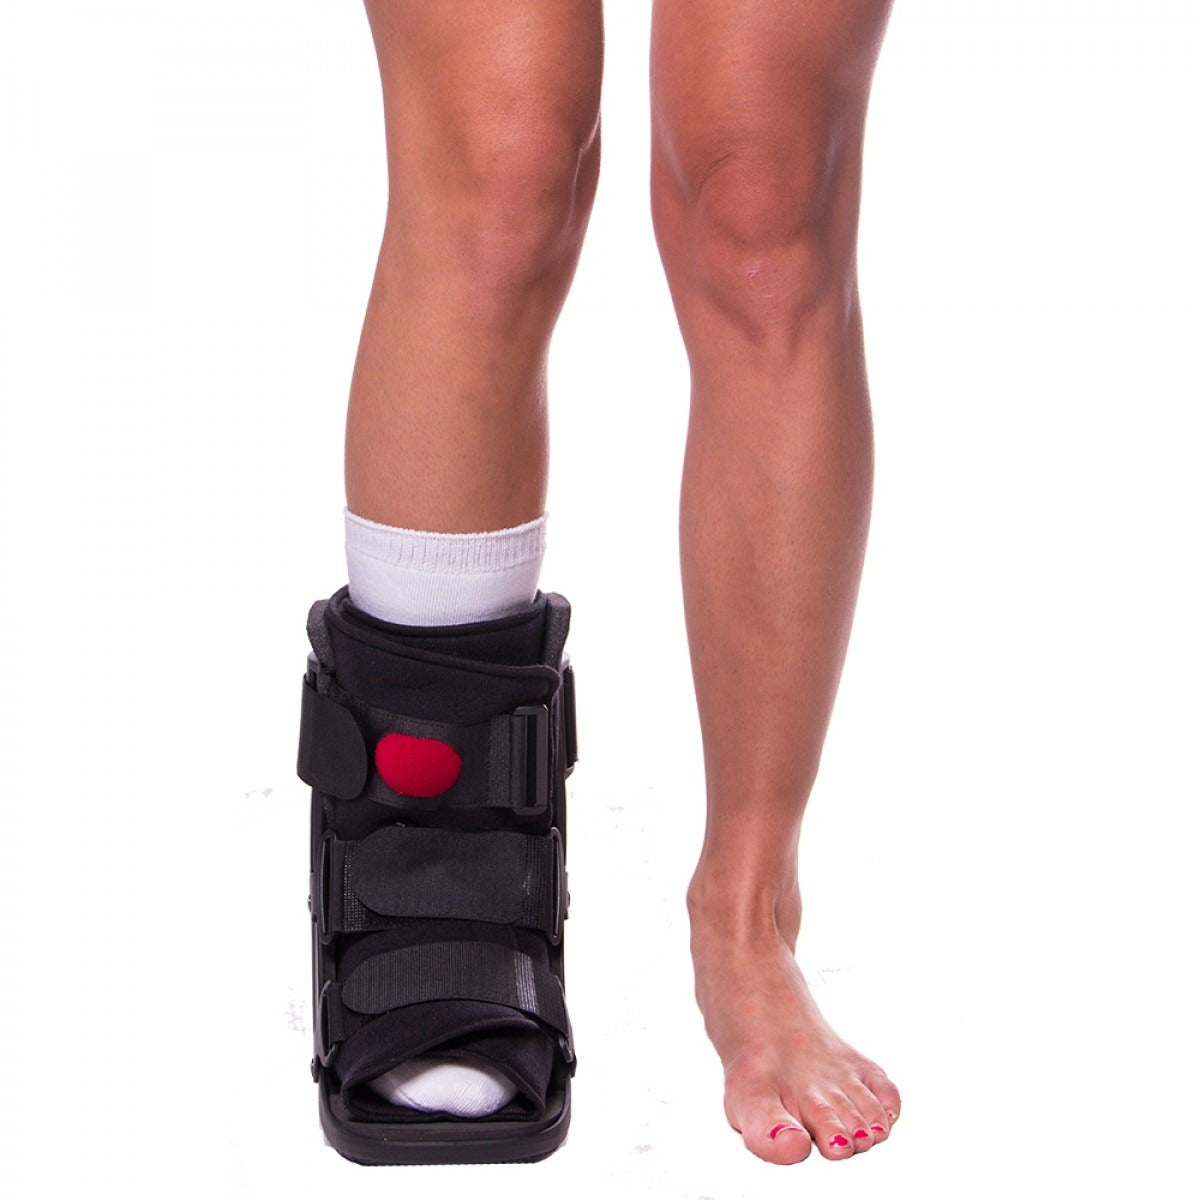 Medical boots for broken foot treatment can also help with diabetic ulcers or after bunion surgery